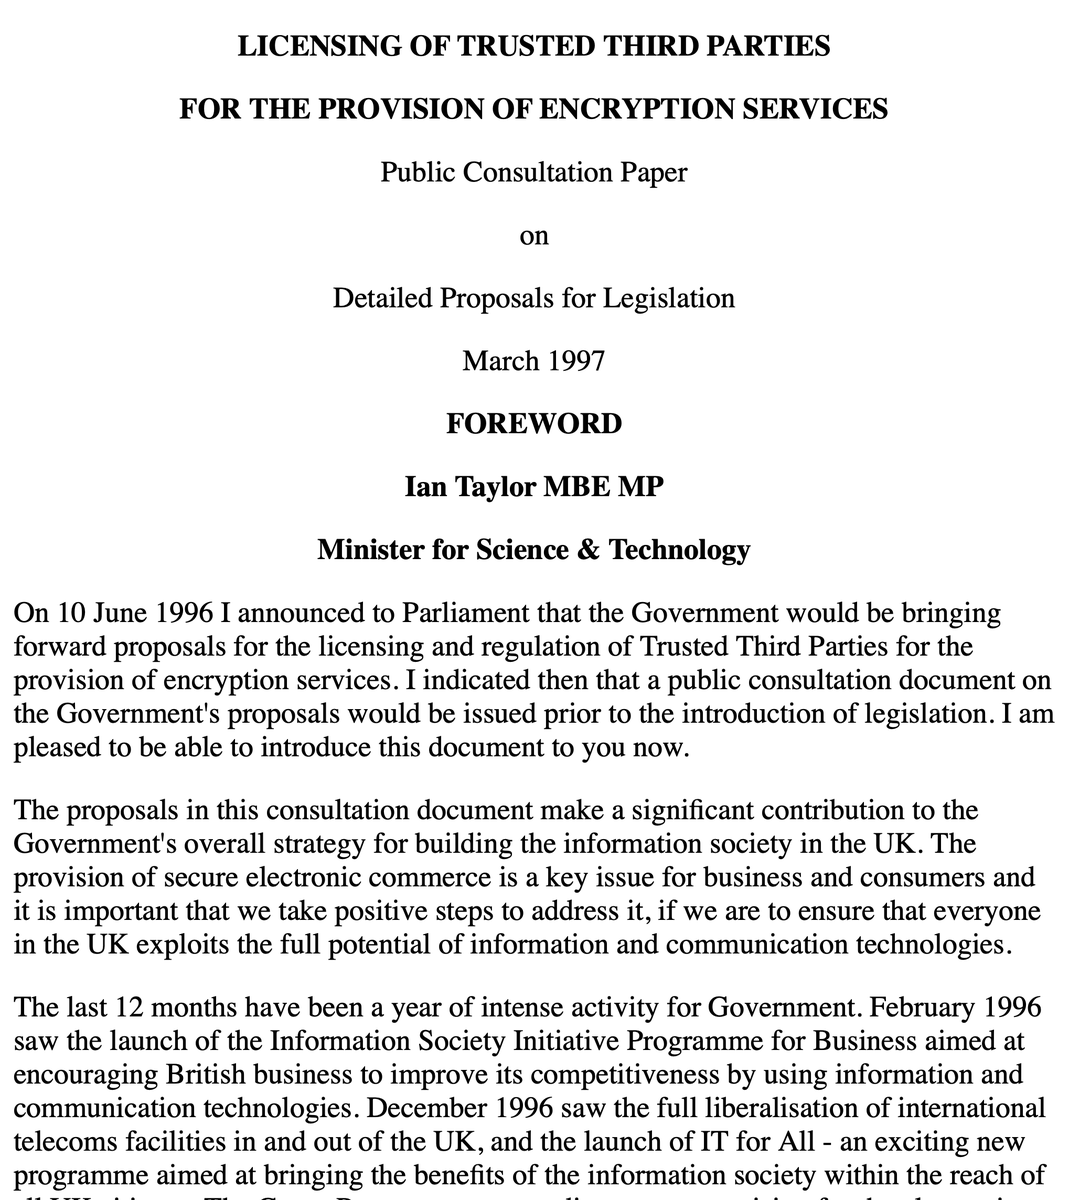 Let's wind the clock back to 1997, and then look at the  @ukhomeoffice press release earlier today:«LICENSING OF TRUSTED THIRD PARTIESFOR THE PROVISION OF  #ENCRYPTION SERVICESPublic Consultation PaperonDetailed Proposals for LegislationMarch 1997» https://web.archive.org/web/19970716004745/http://www.dti.gov.uk/pubs/